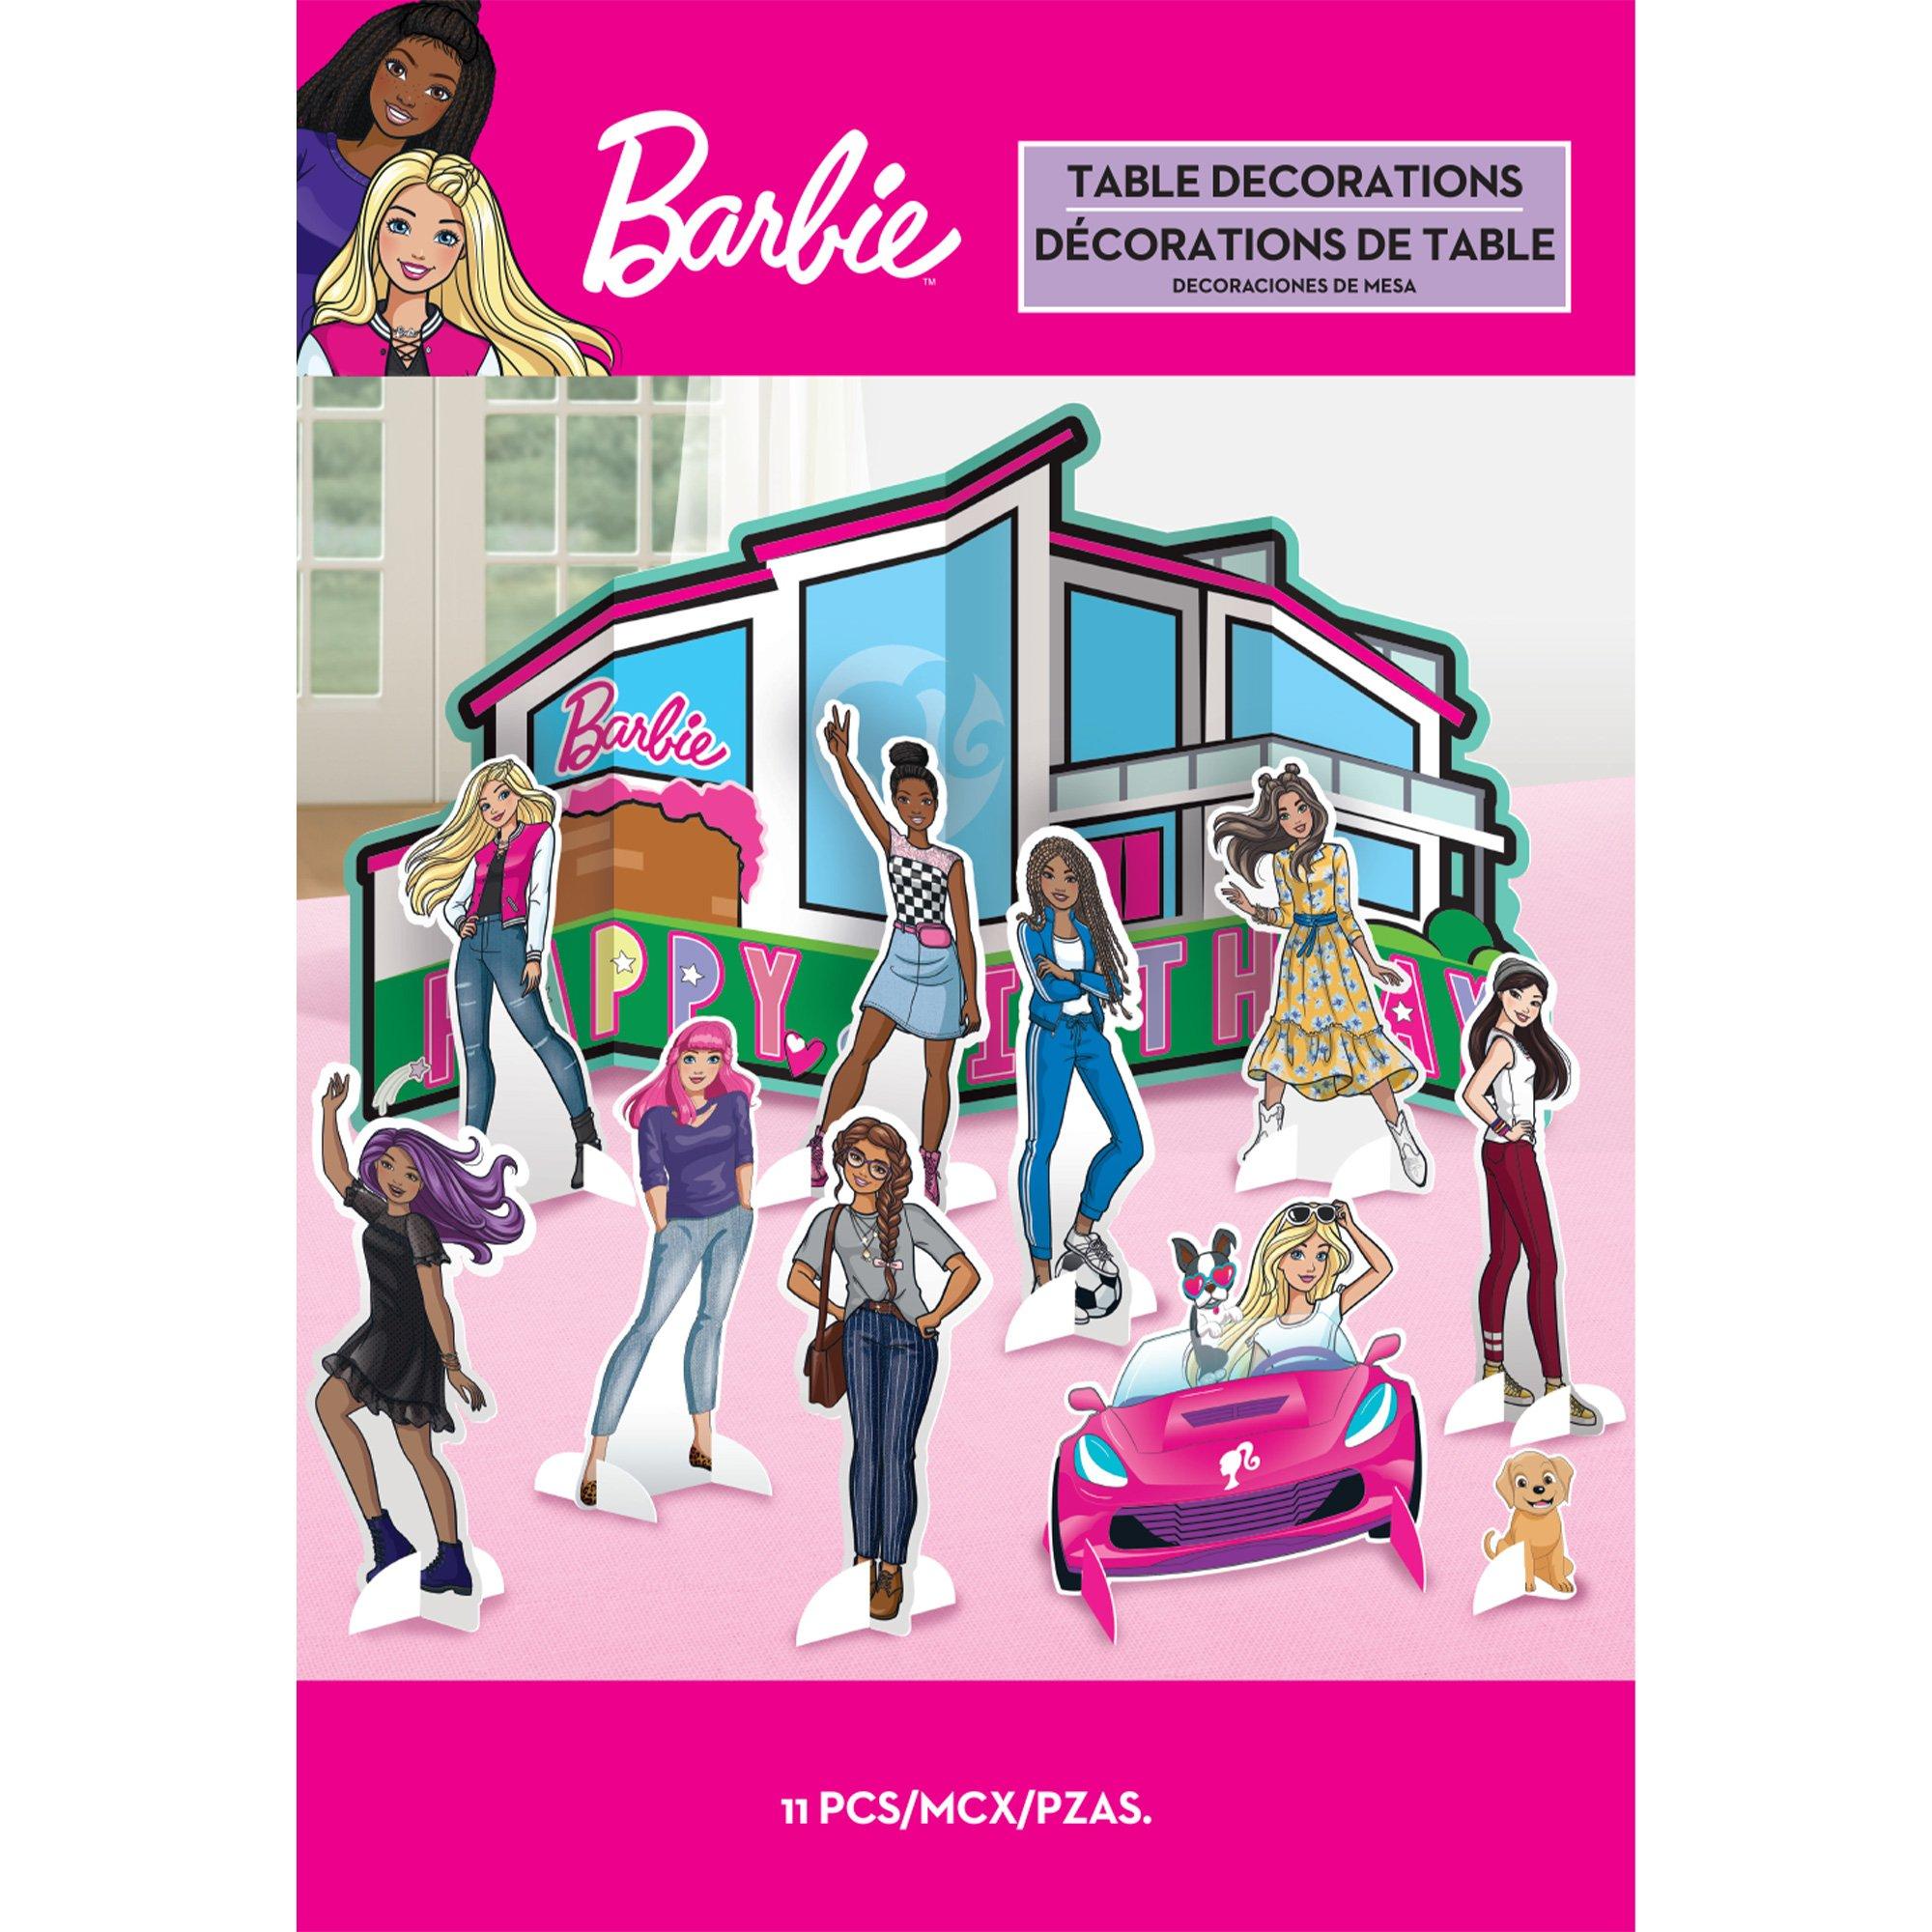 Barbie Dream Together Birthday Table Decorating Kit, 11pc